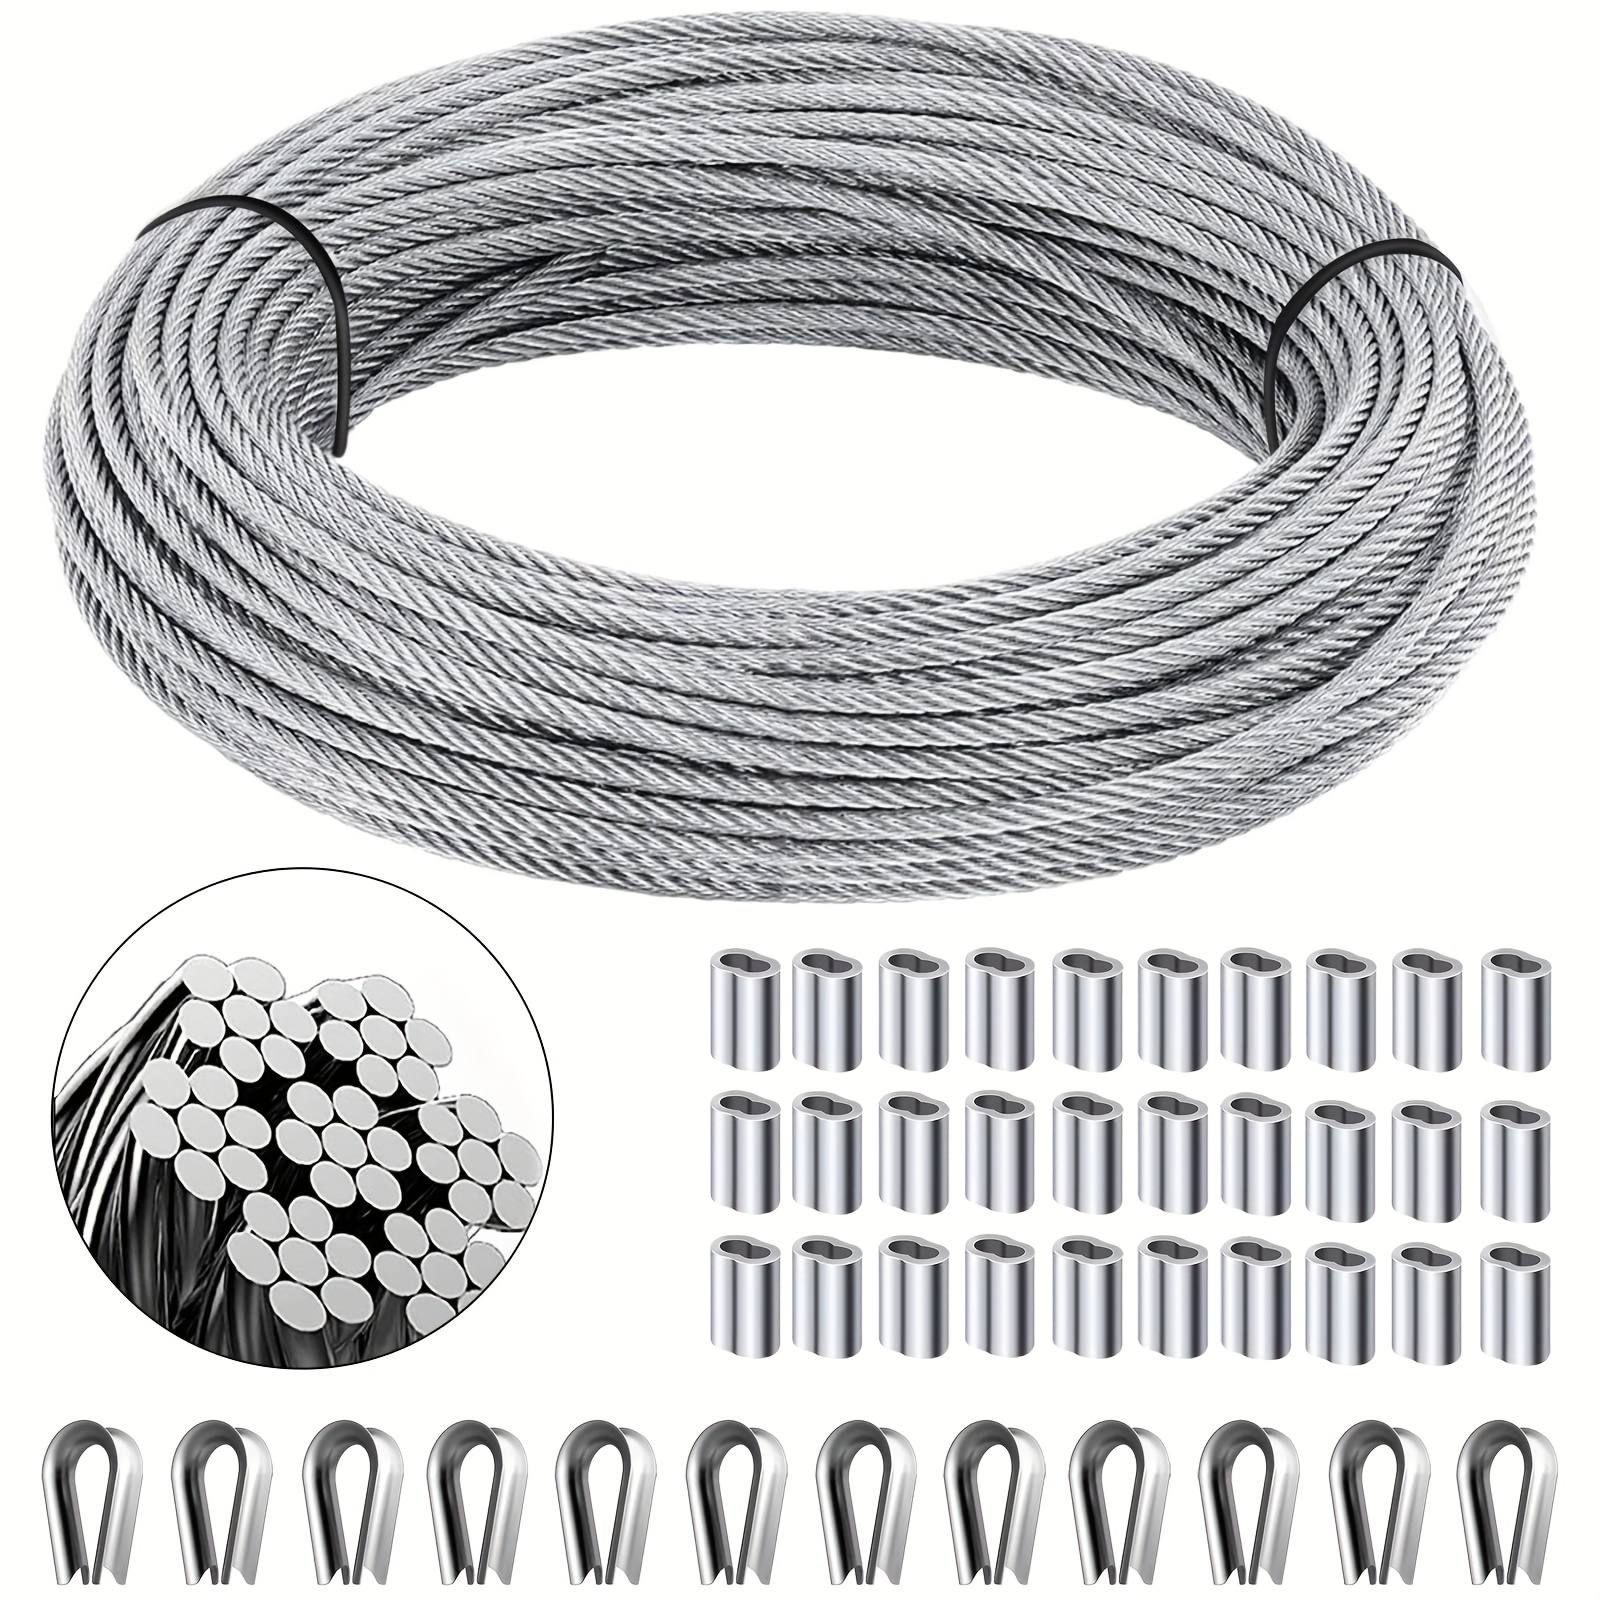 Buy Small Cable Crimp Sleeves for Steel Cable (1/16-inch or 1/8